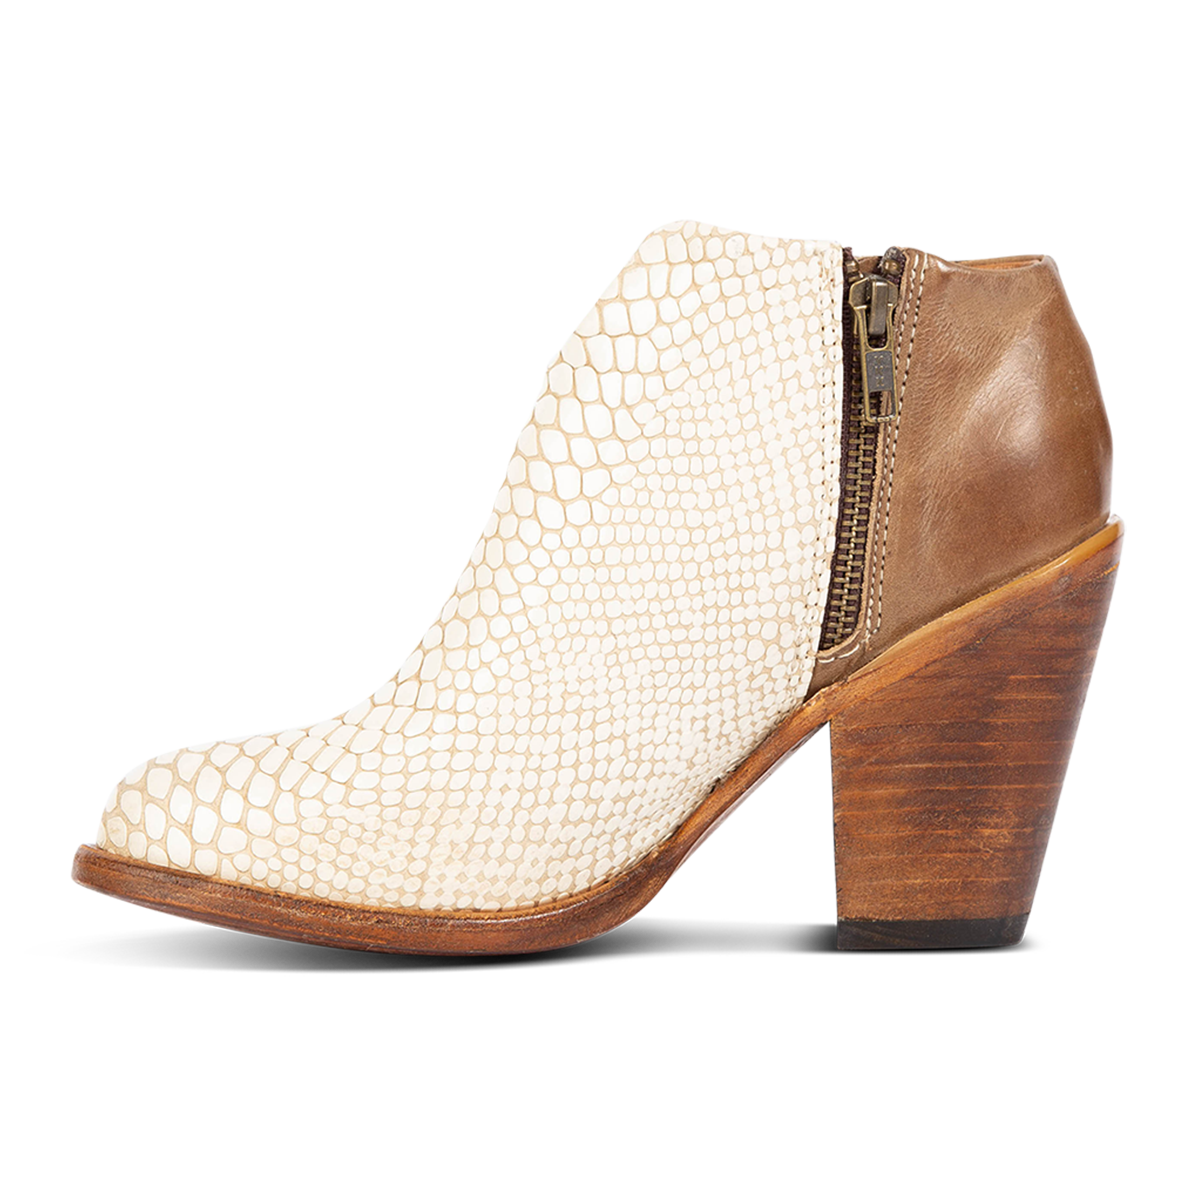 Inside view showing zip closure and two toned leather on FREEBIRD women's Detroit white snake bootie